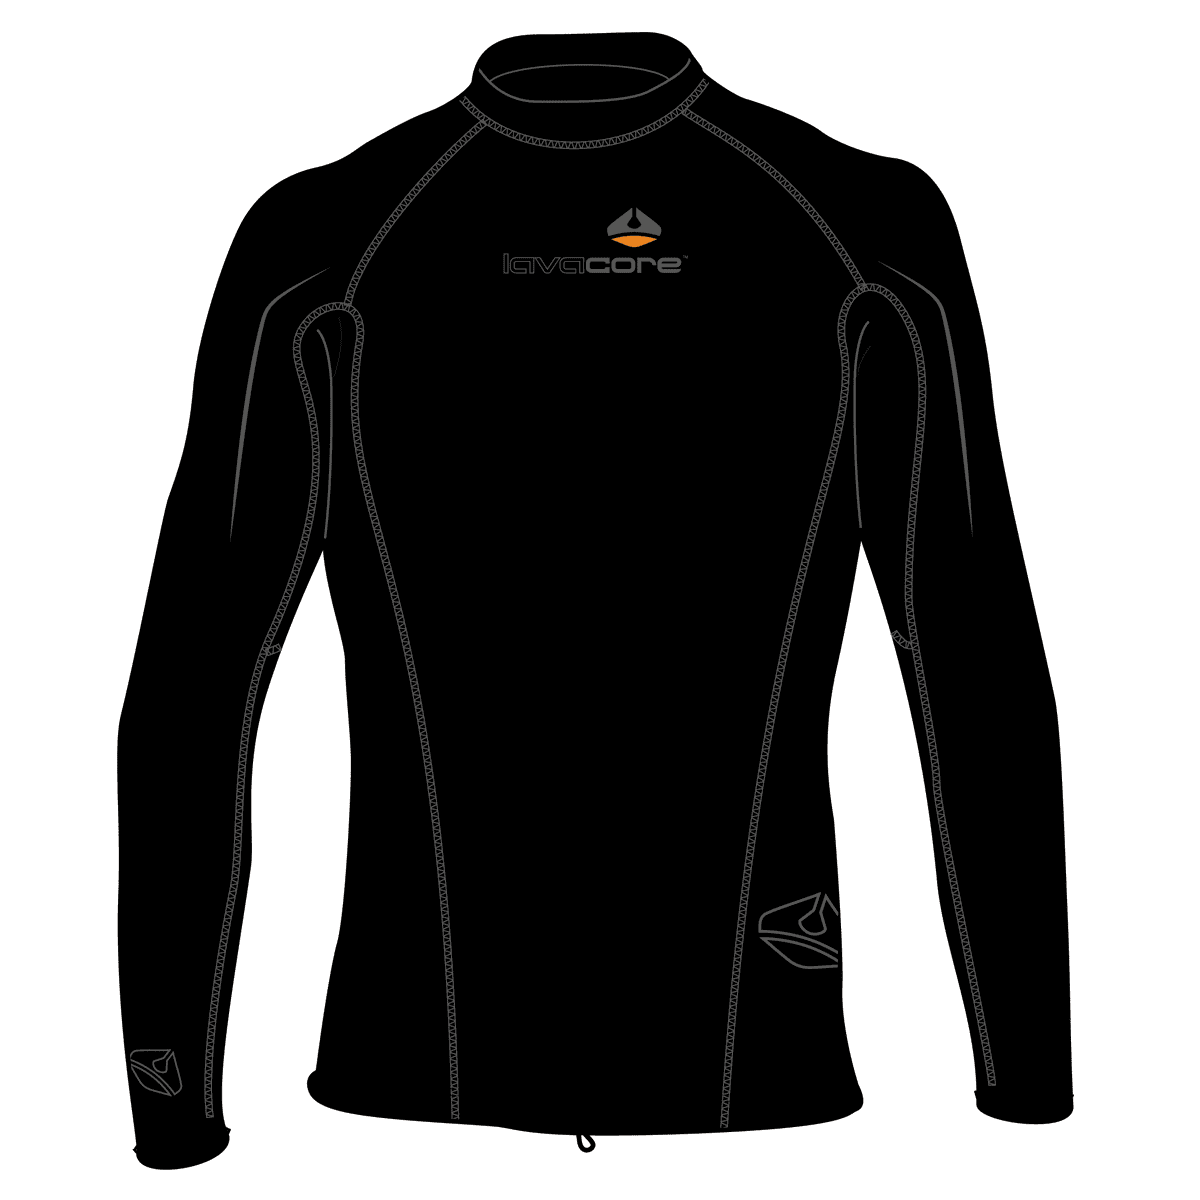 Womens Long Sleeve Shirt Lavacore Function Clothing For Water Sports 